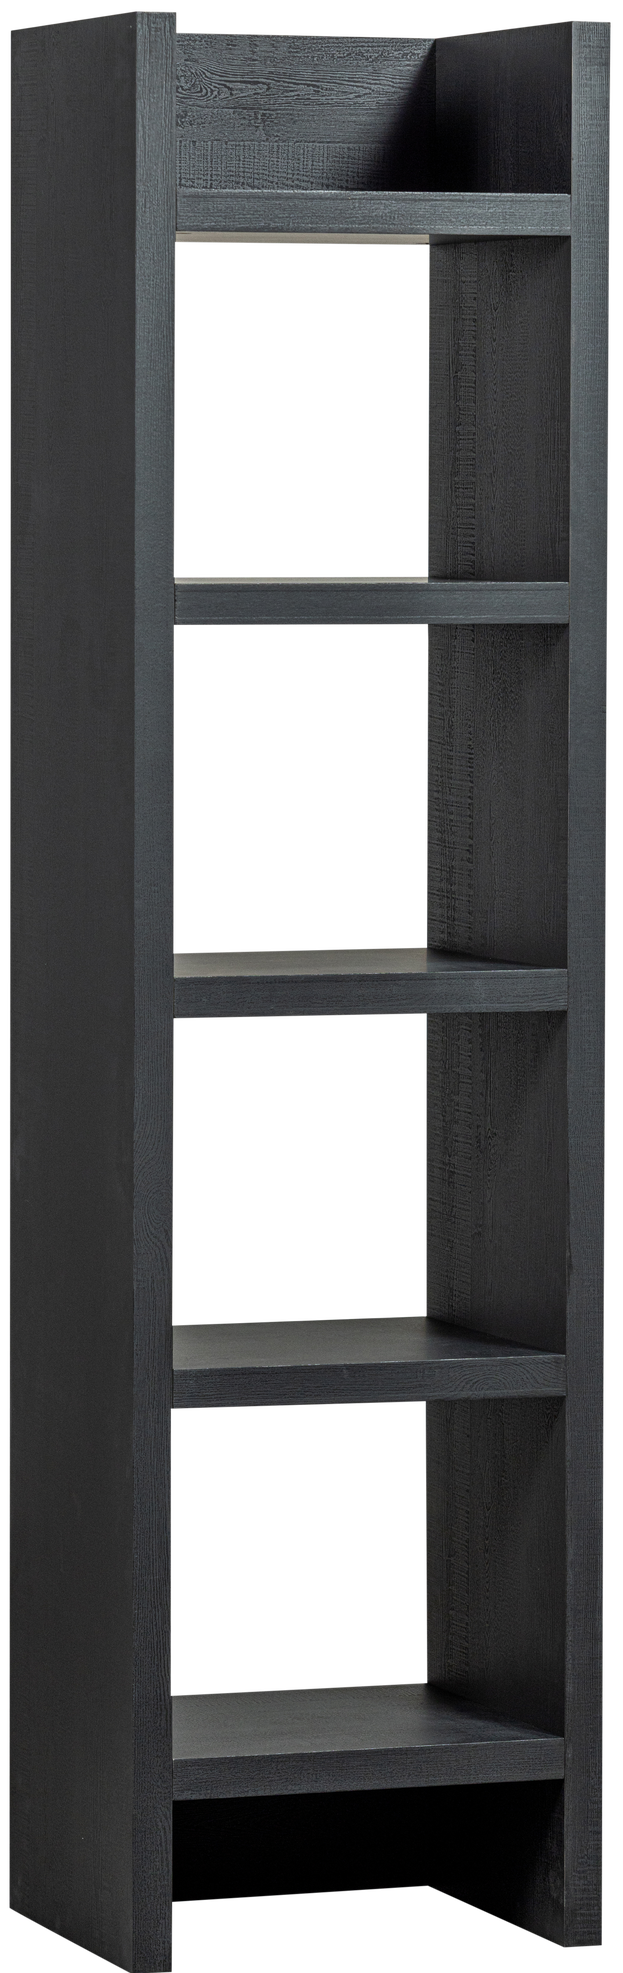 Timo open kast mdf donkerbruin - 195x50x40cm